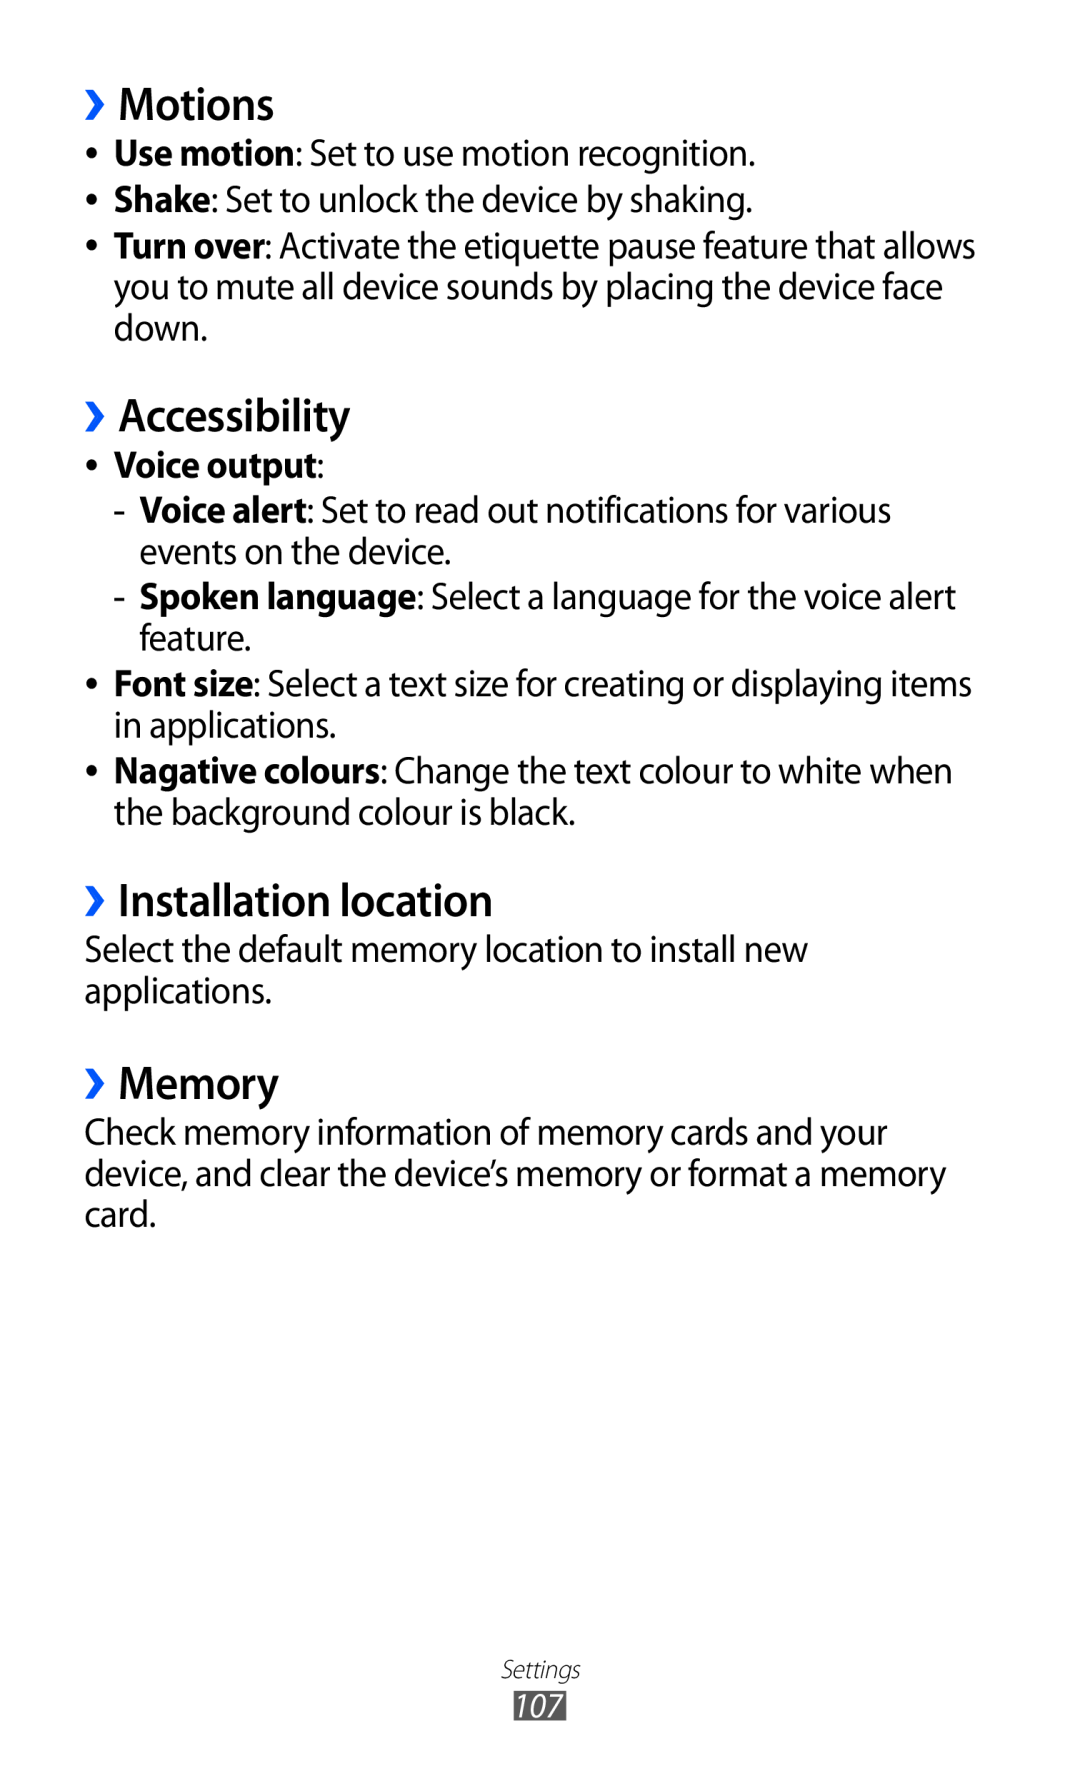 Samsung GT-S5380PWATIM, GT-S5380SSADBT manual ››Motions, ››Accessibility, ››Installation location, ››Memory, Voice output 